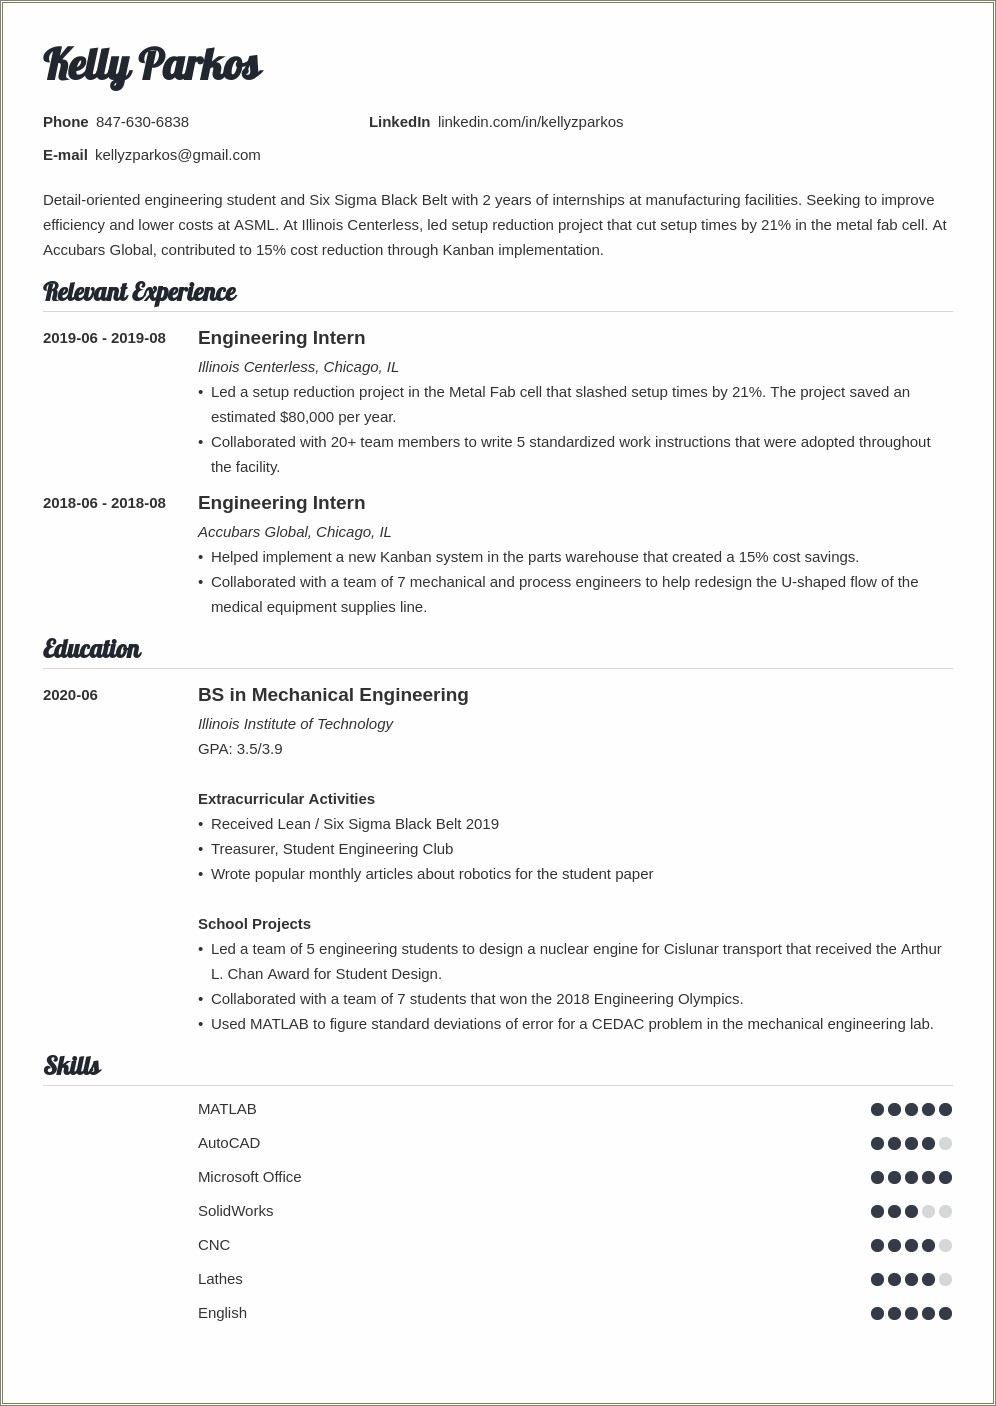 Petrolueum Engineering Student Resume With No Experience